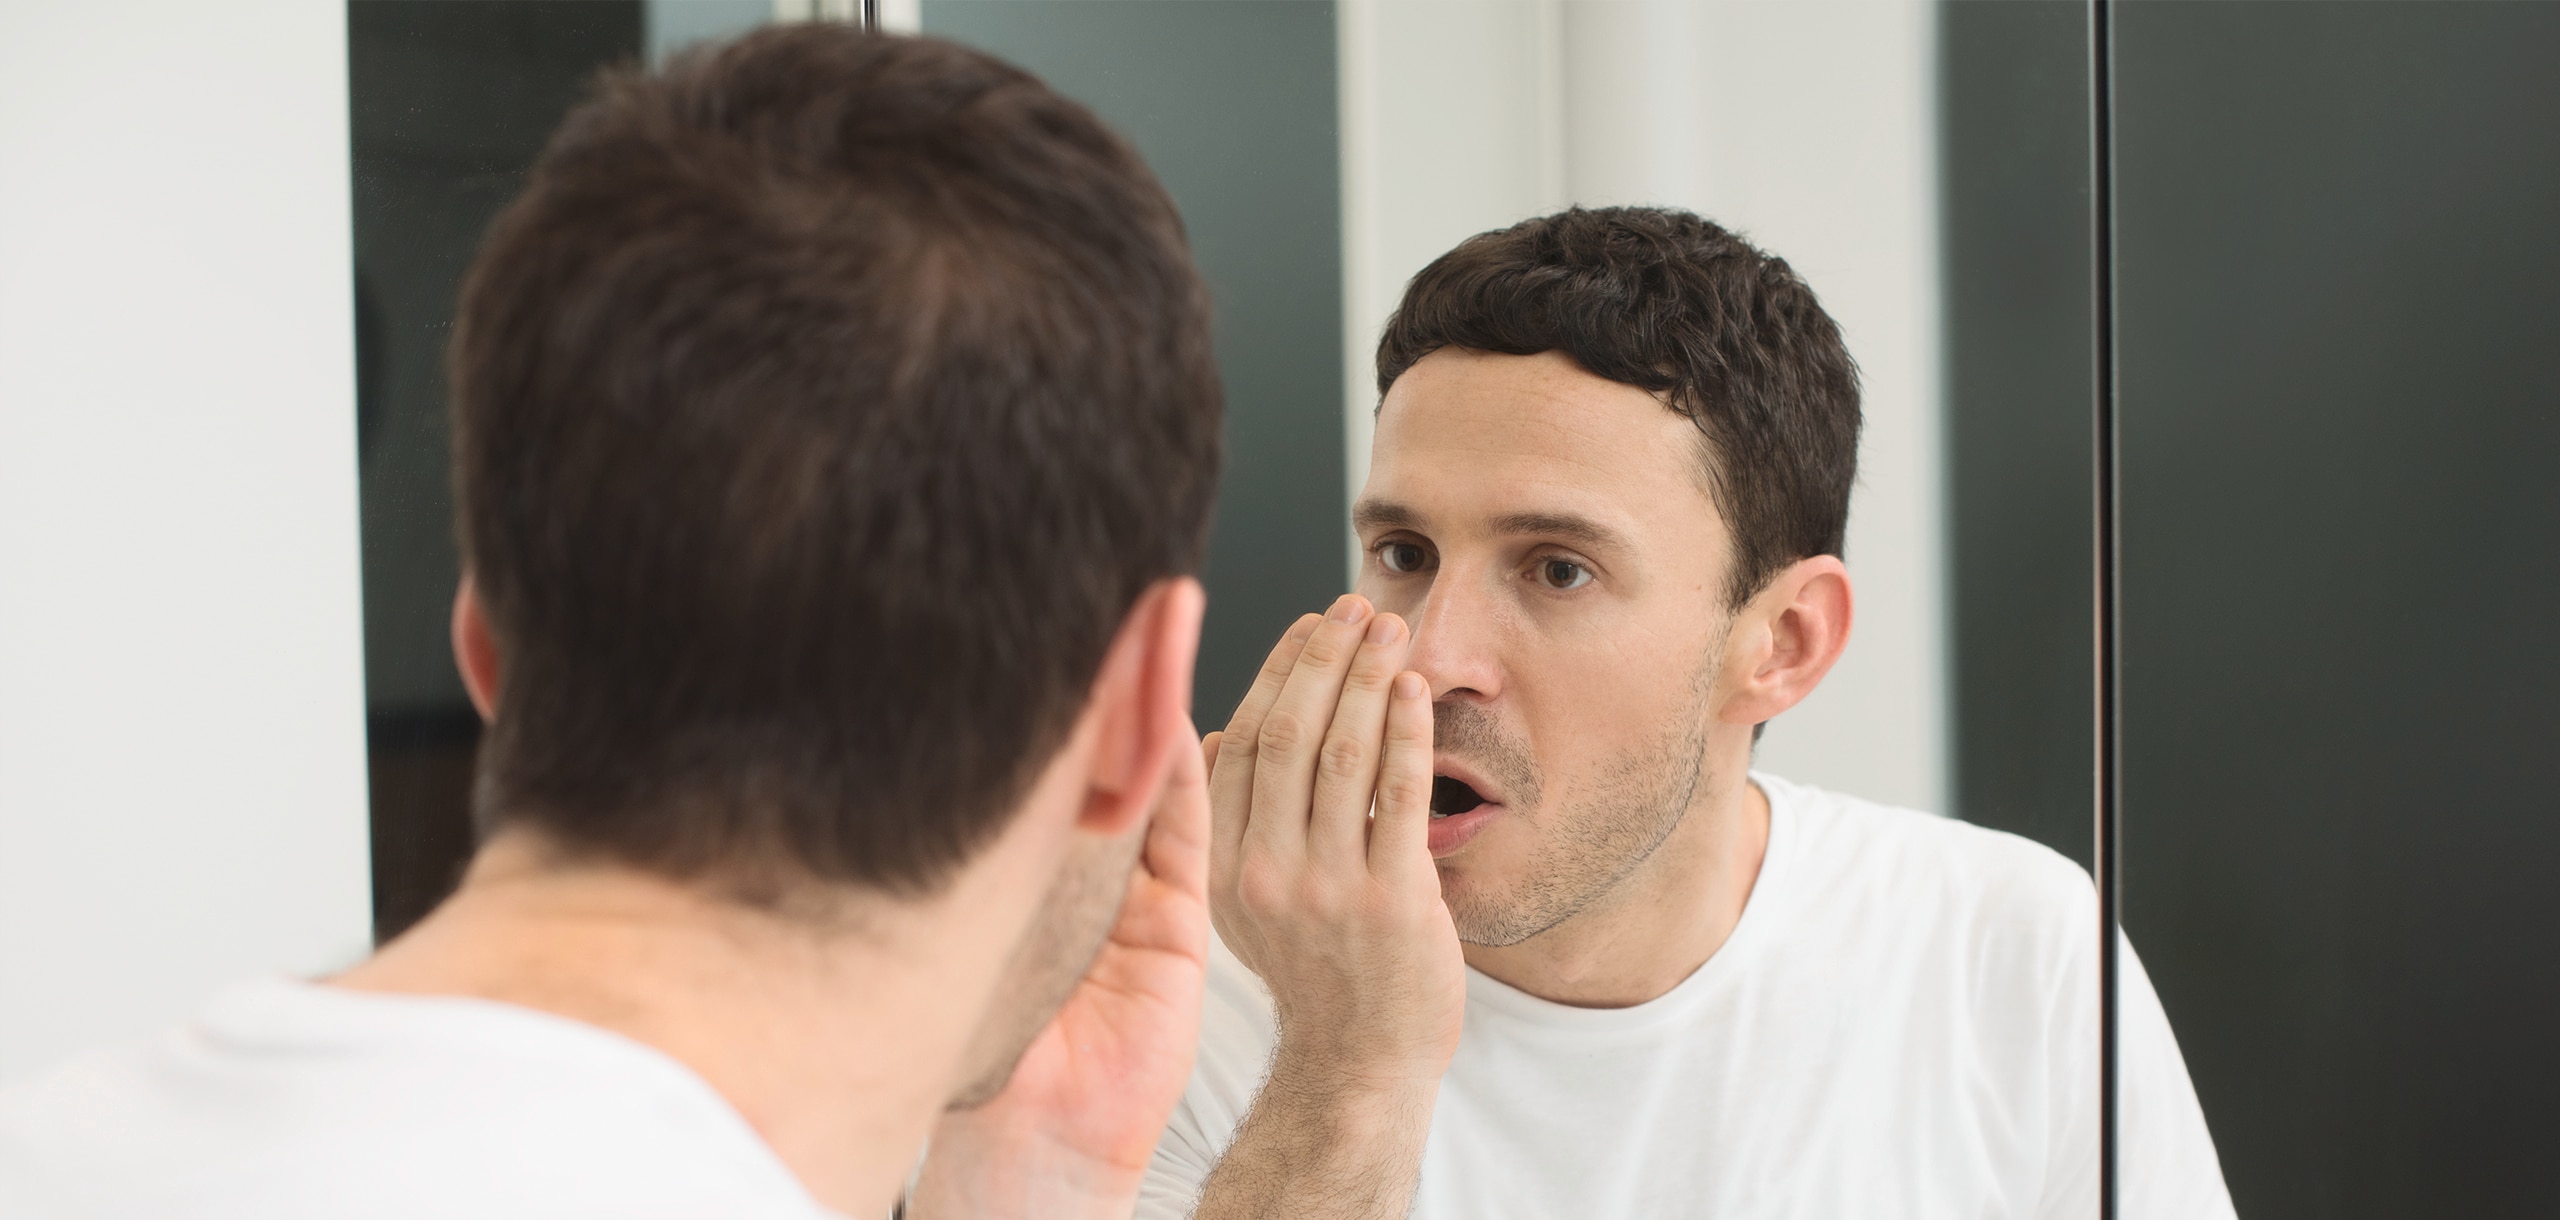 Five myths about bad breath